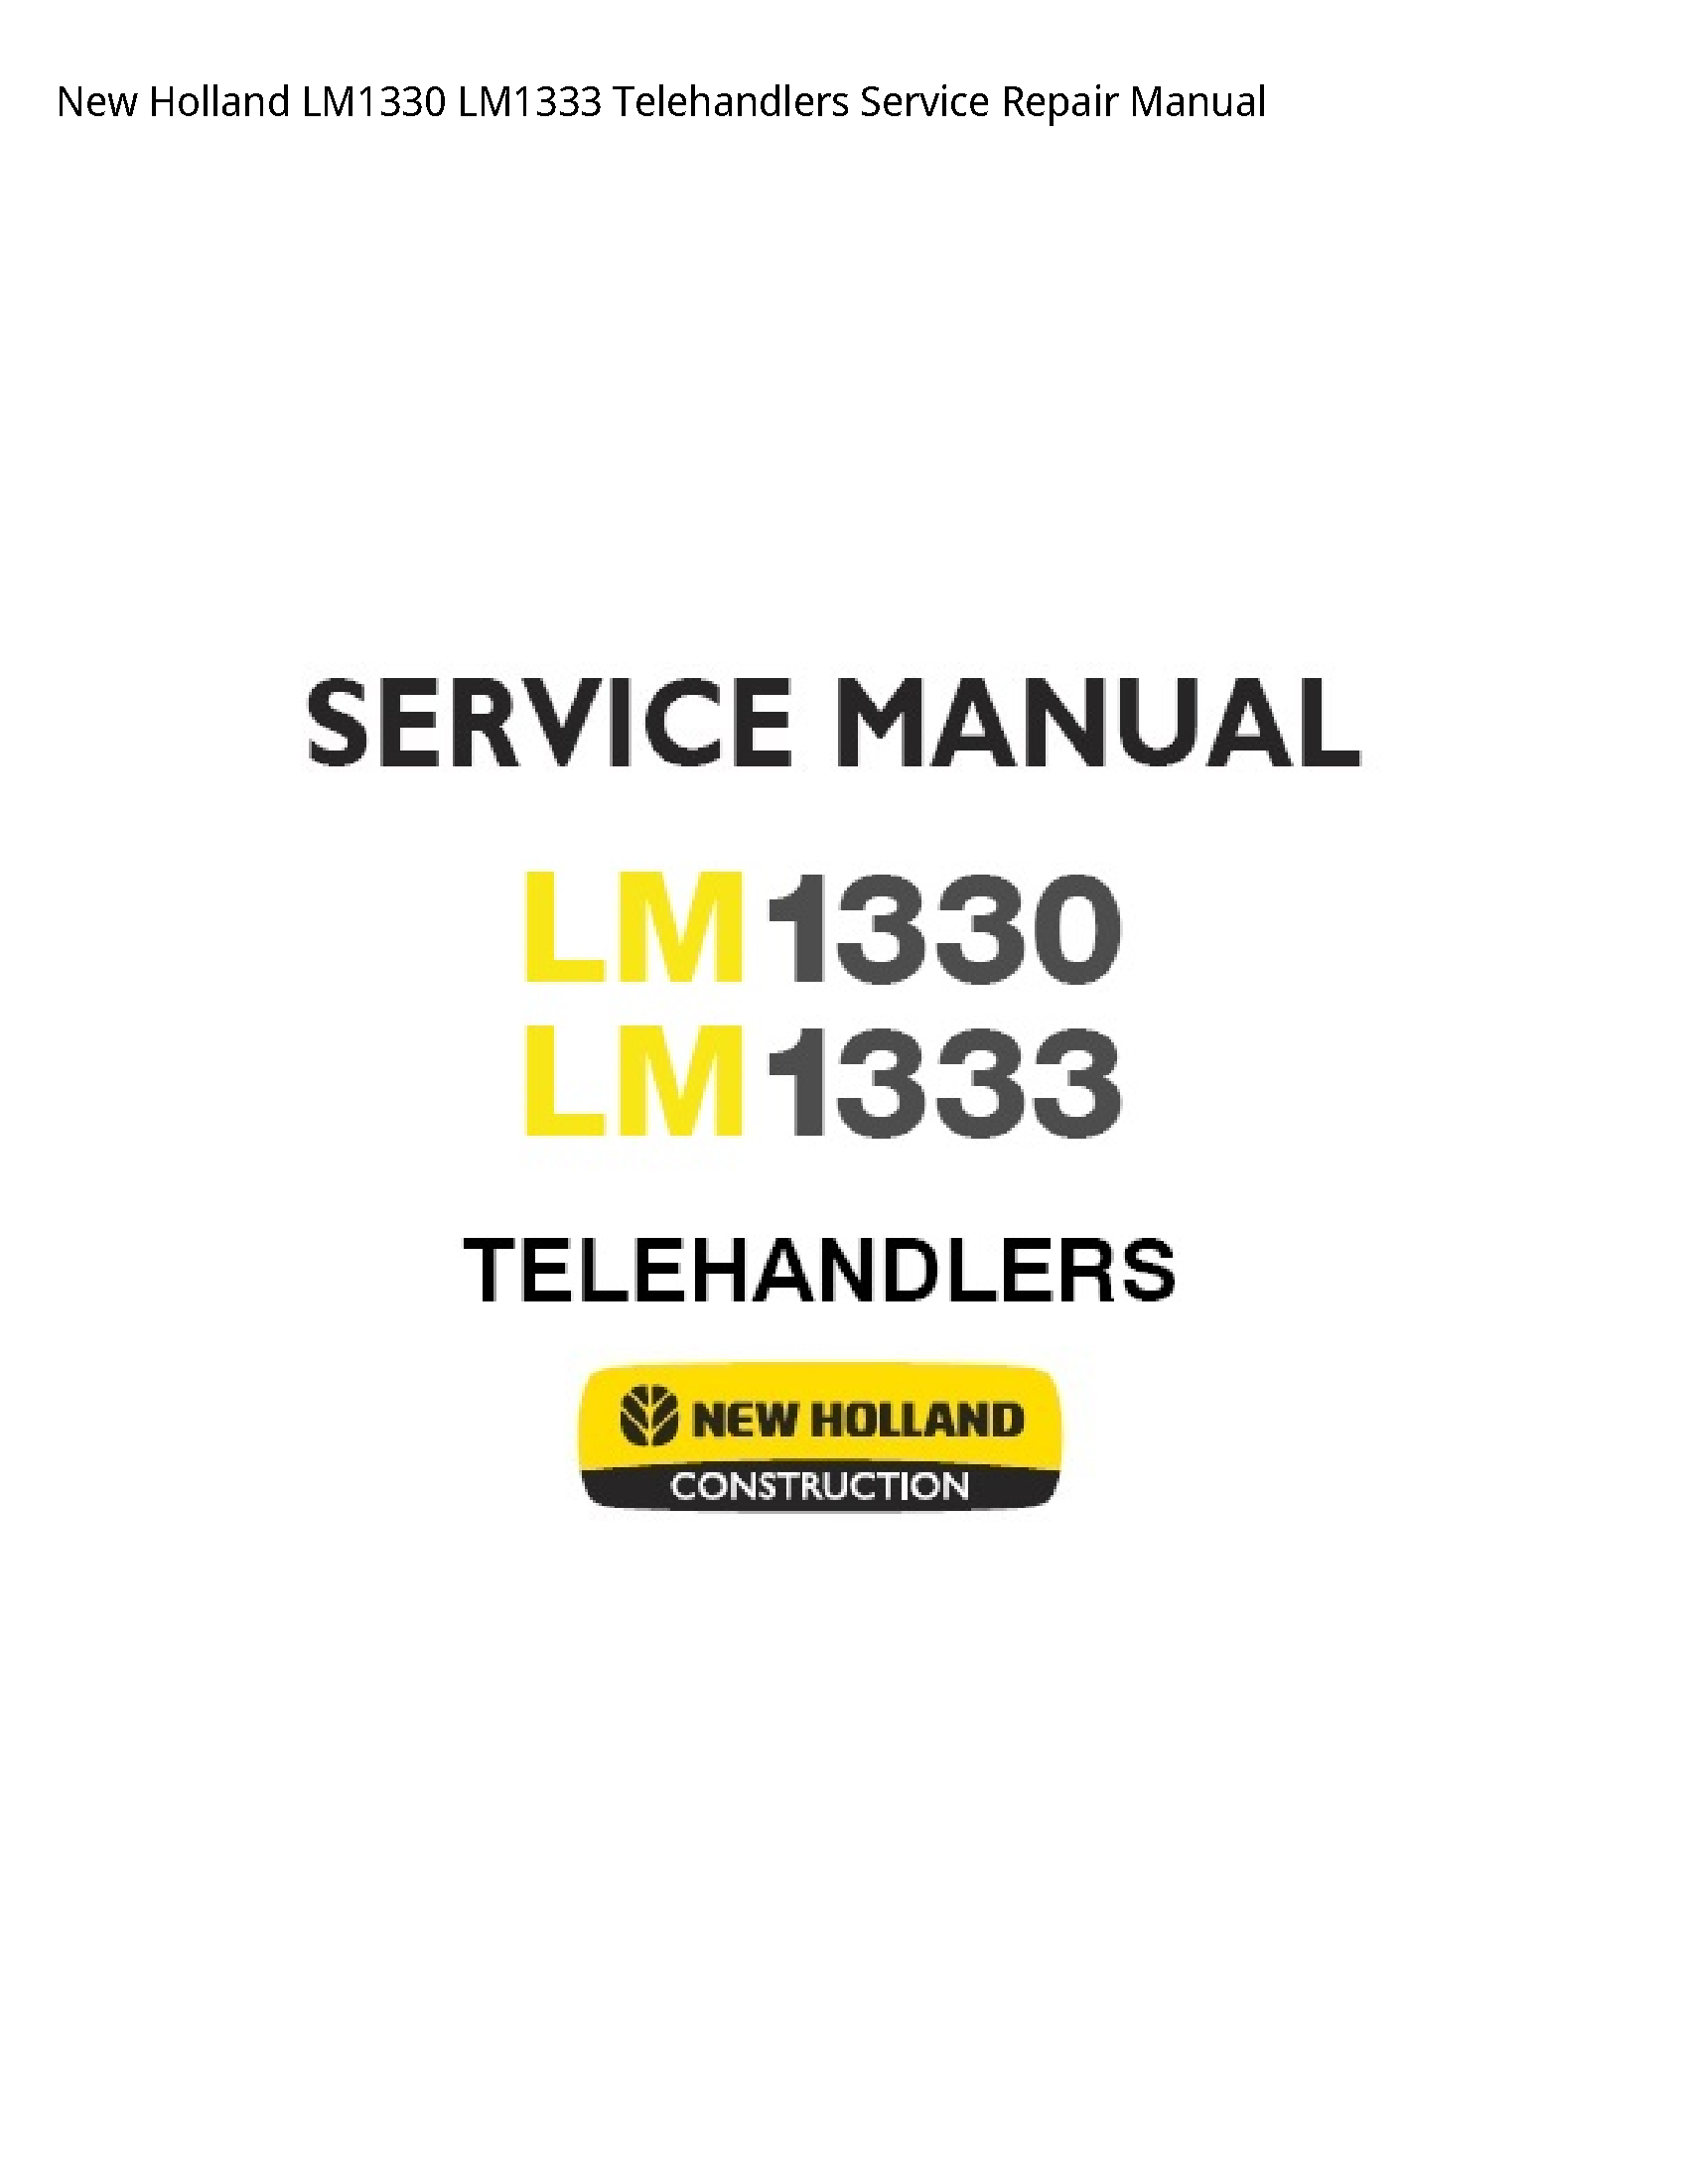 New Holland LM1330 Telehandlers manual